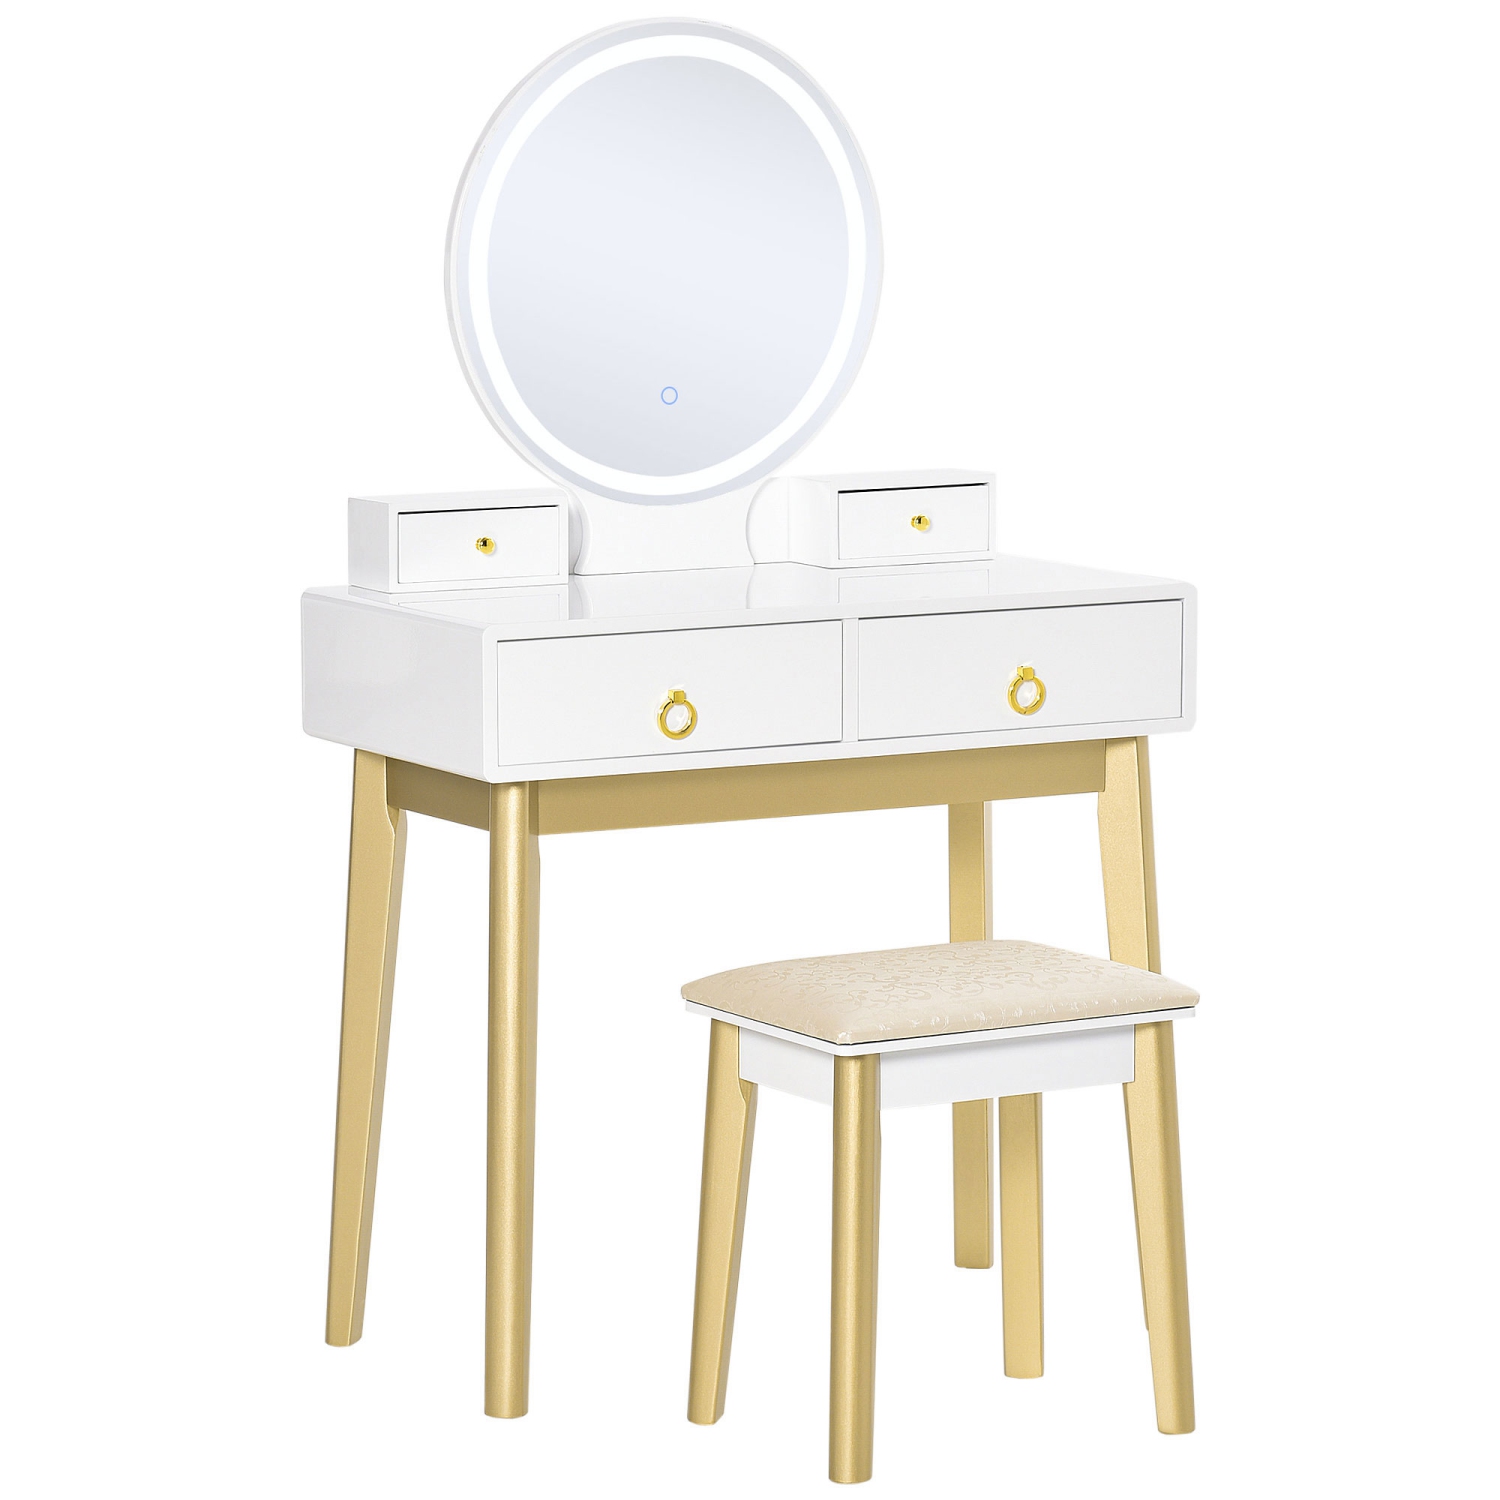 HOMCOM Vanity Table Set with Round Mirror, Built-in 3 Color LED Light, Makeup Dressing Table with 4 Drawers and Cushioned Stool for Bedroom, White